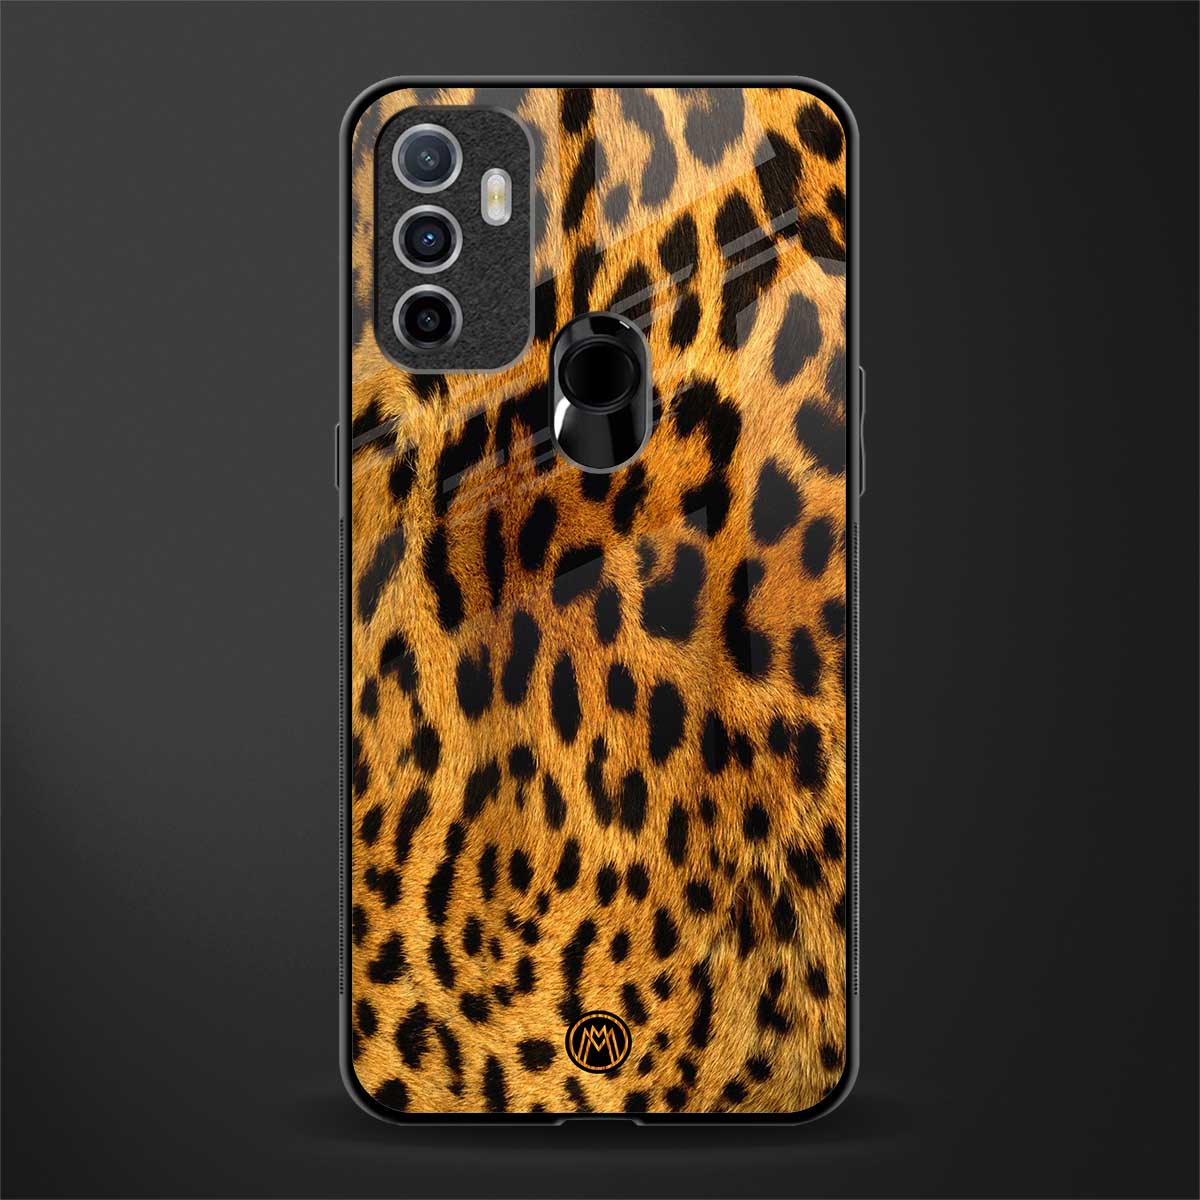 leopard fur glass case for oppo a53 image